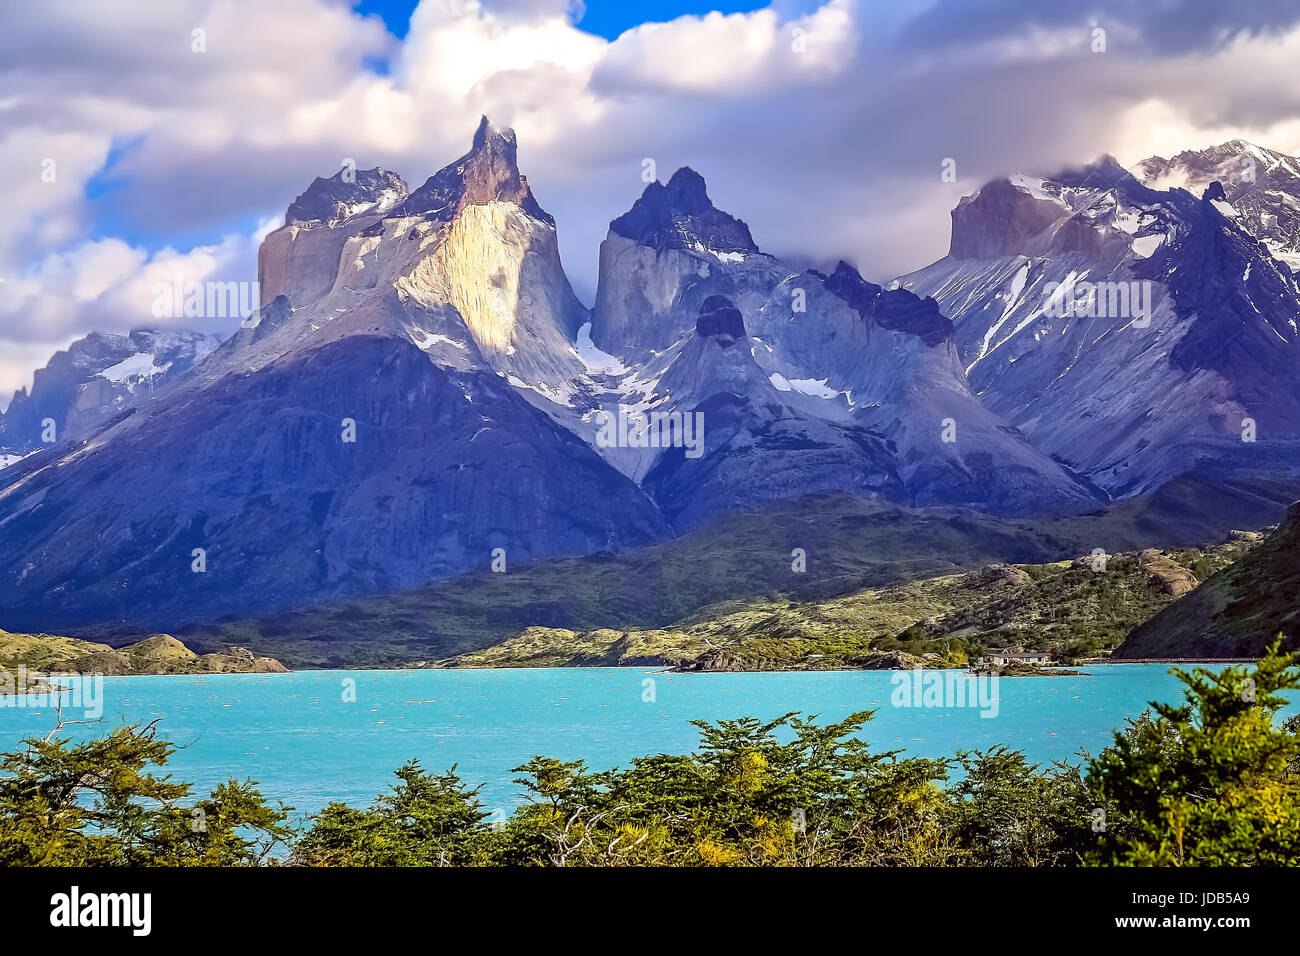 Stunning Cuernos Del Paine Peaks In Patagonia Southern Chile Stock